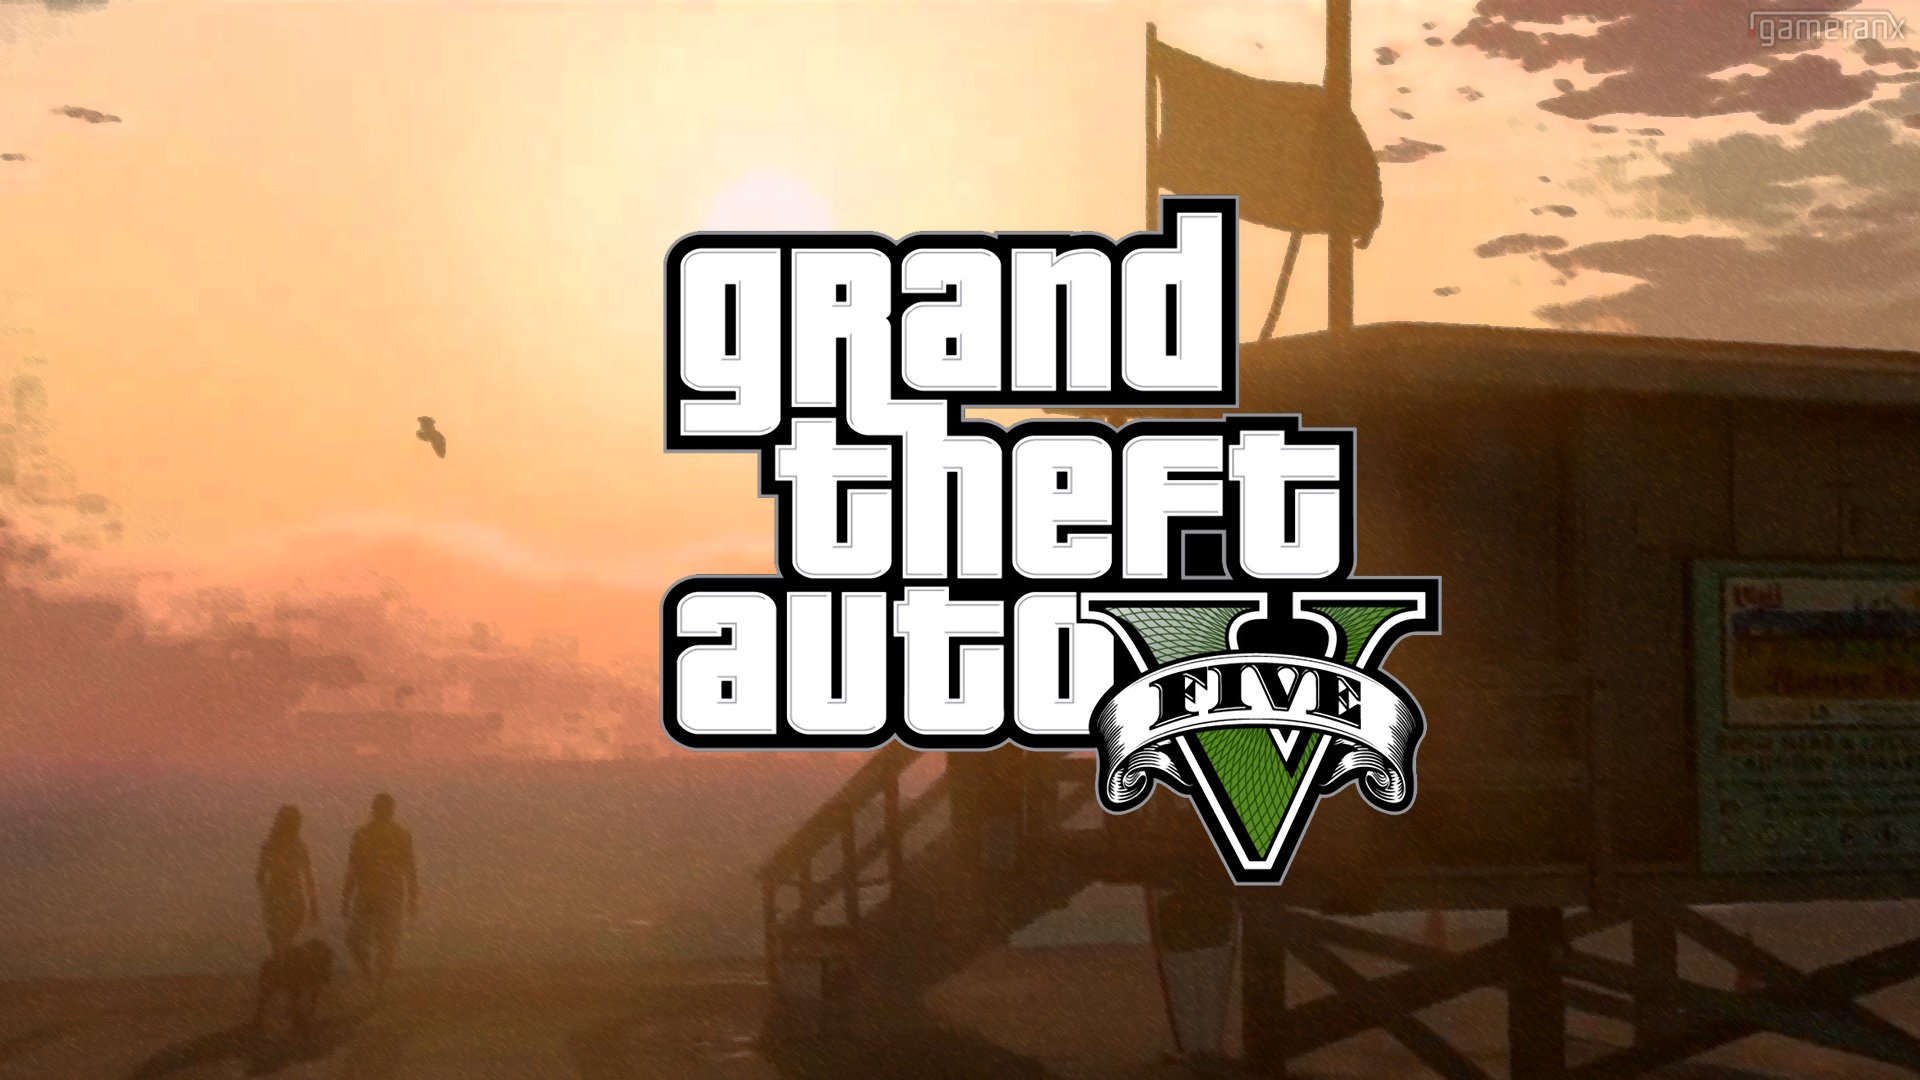 gta 5 for pc free download